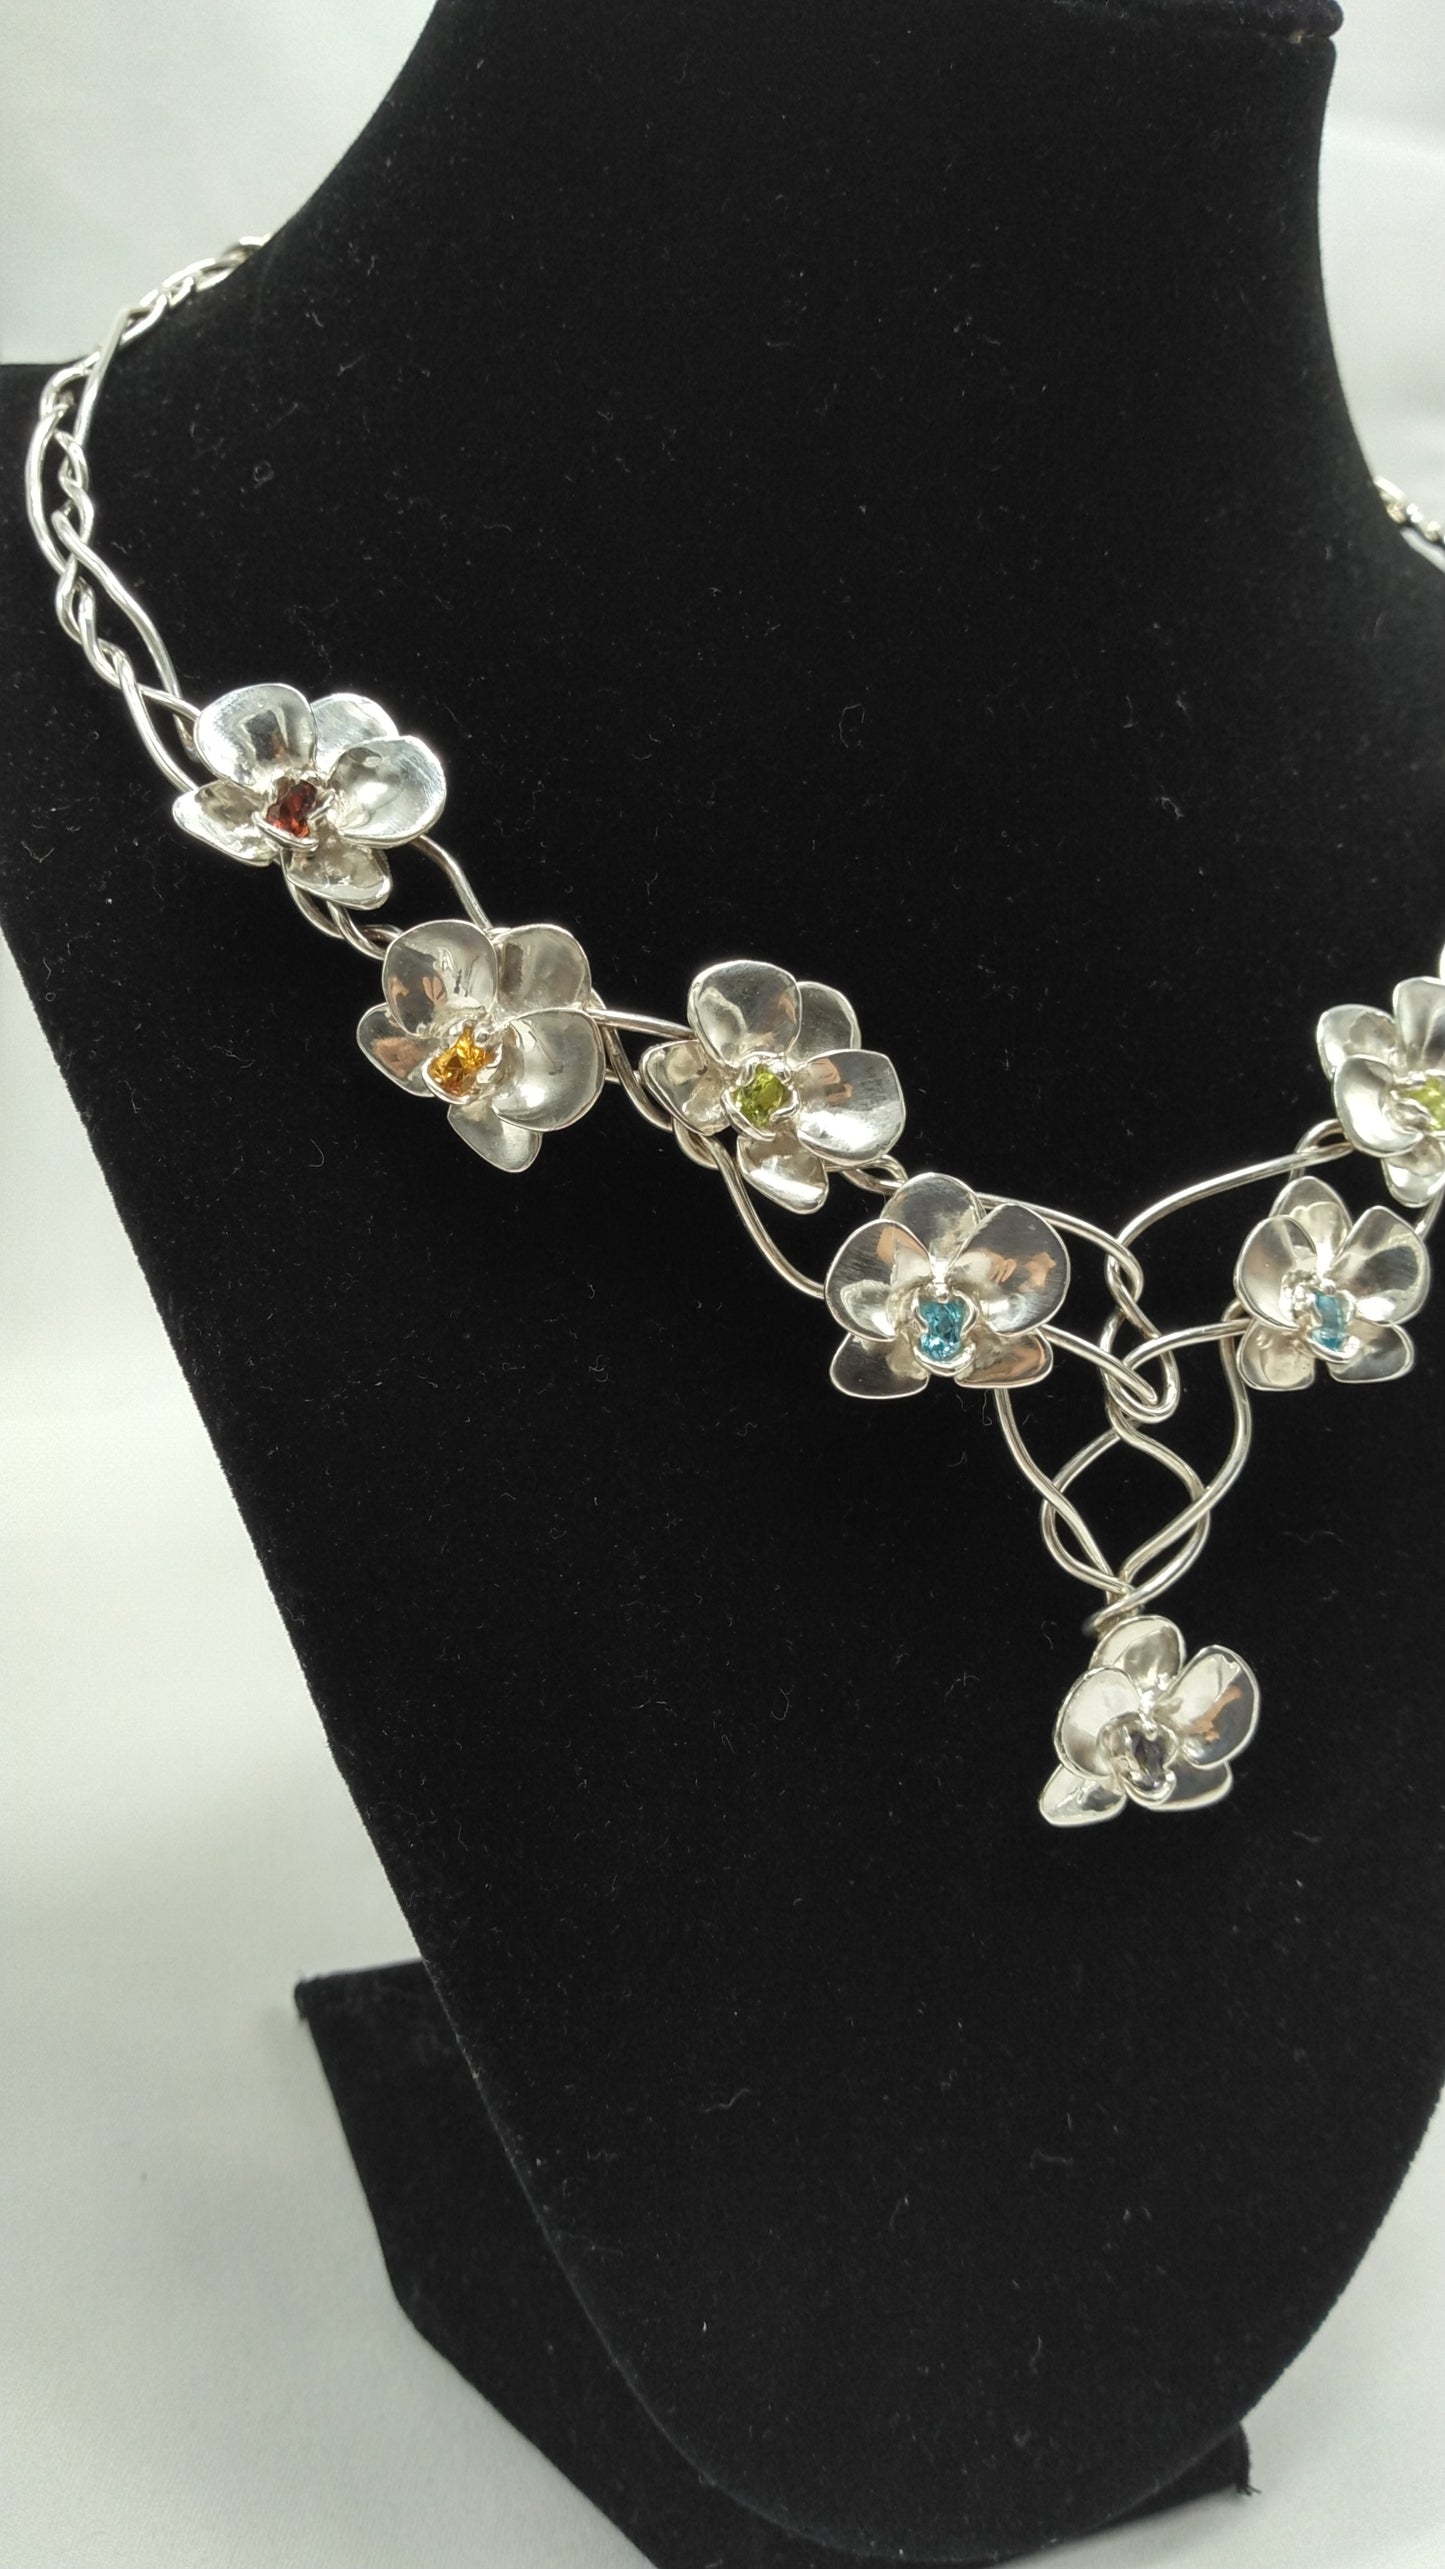 Twisted Silver Orchid Necklace with Colored Stones